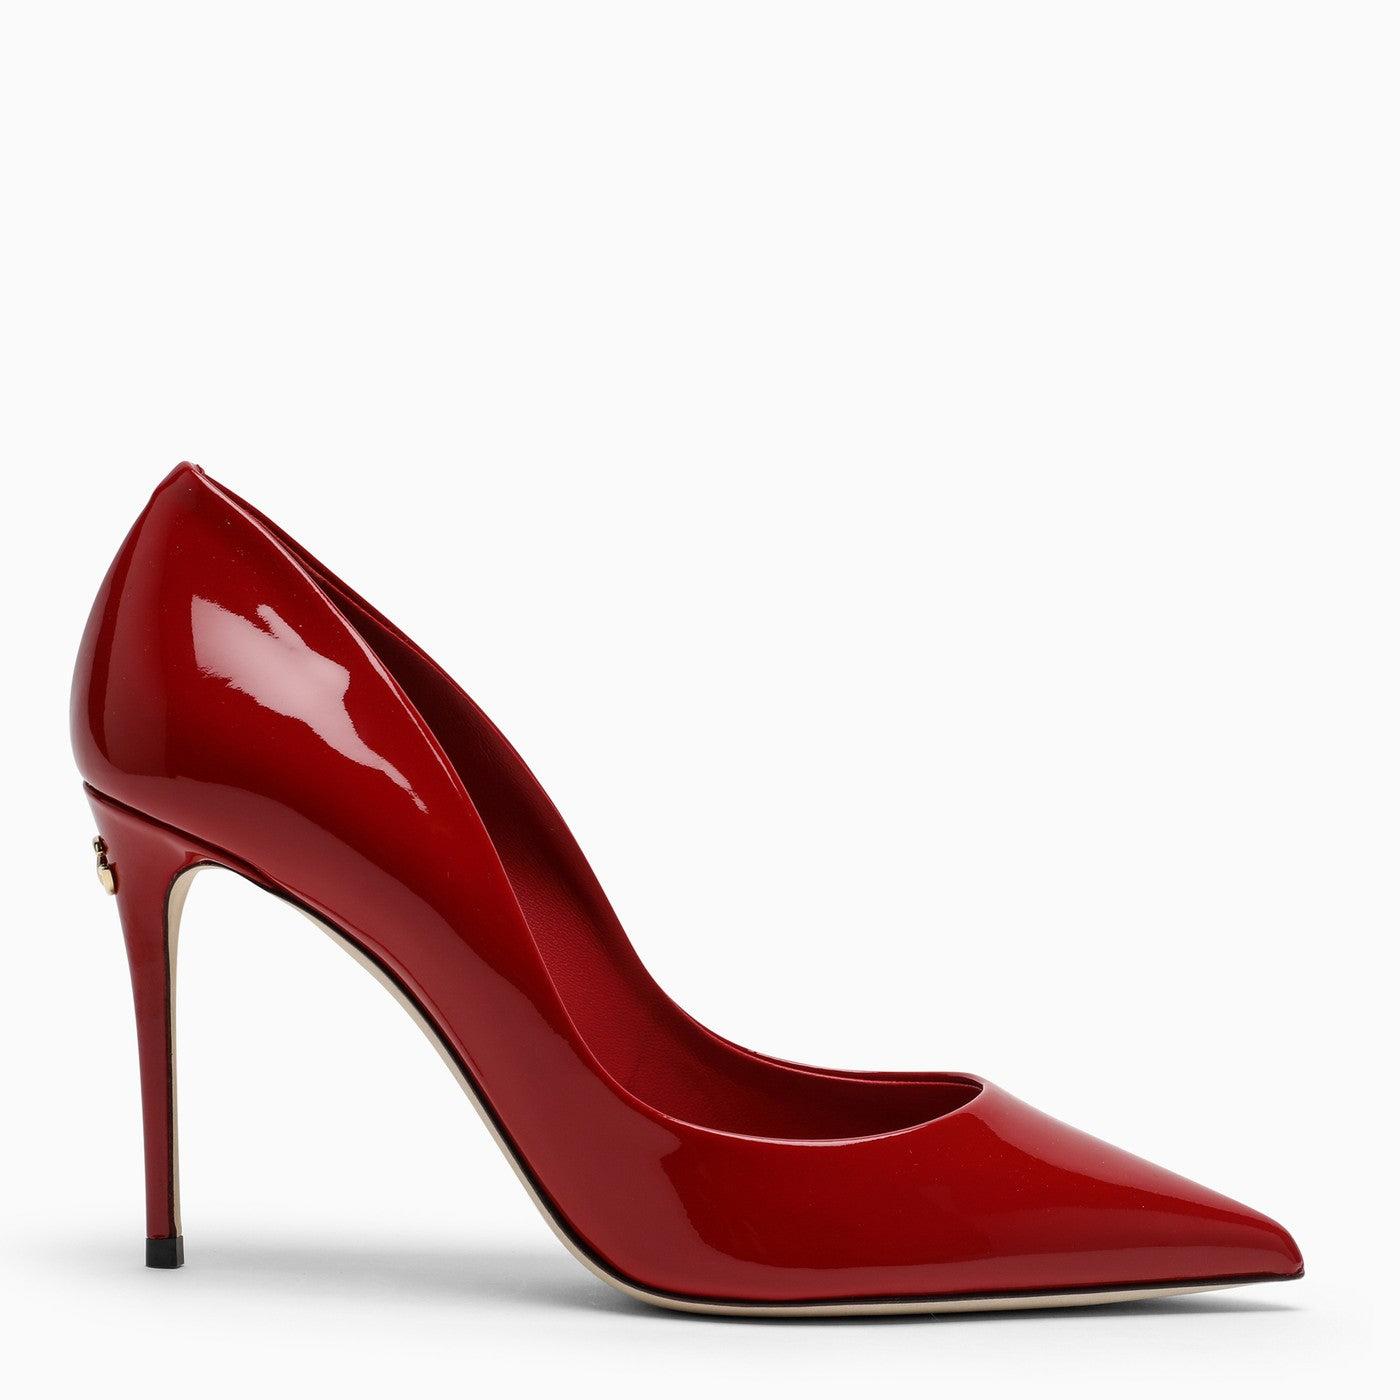 Dolce & Gabbana Red Patent Leather High Heels | Lyst